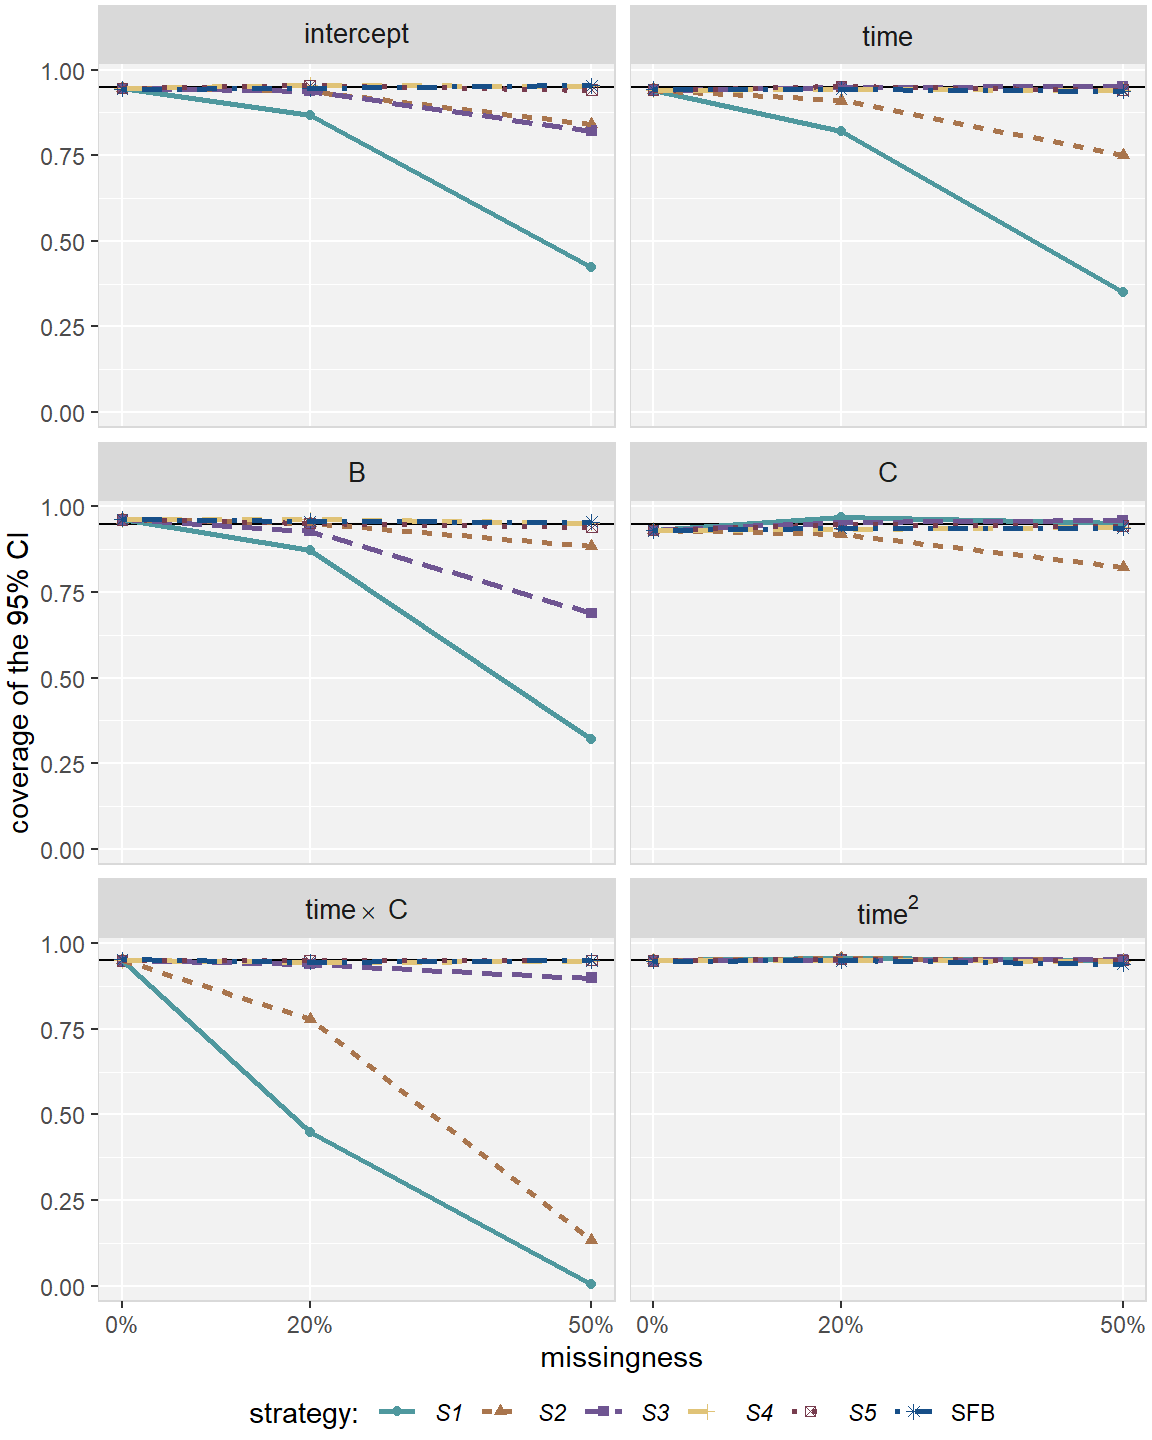 Coverage rate in simulation *Scenario 2*, for the five imputation strategies using MICE
  (*S1* -- *S5*) and the sequential fully Bayesian approach (SFB).